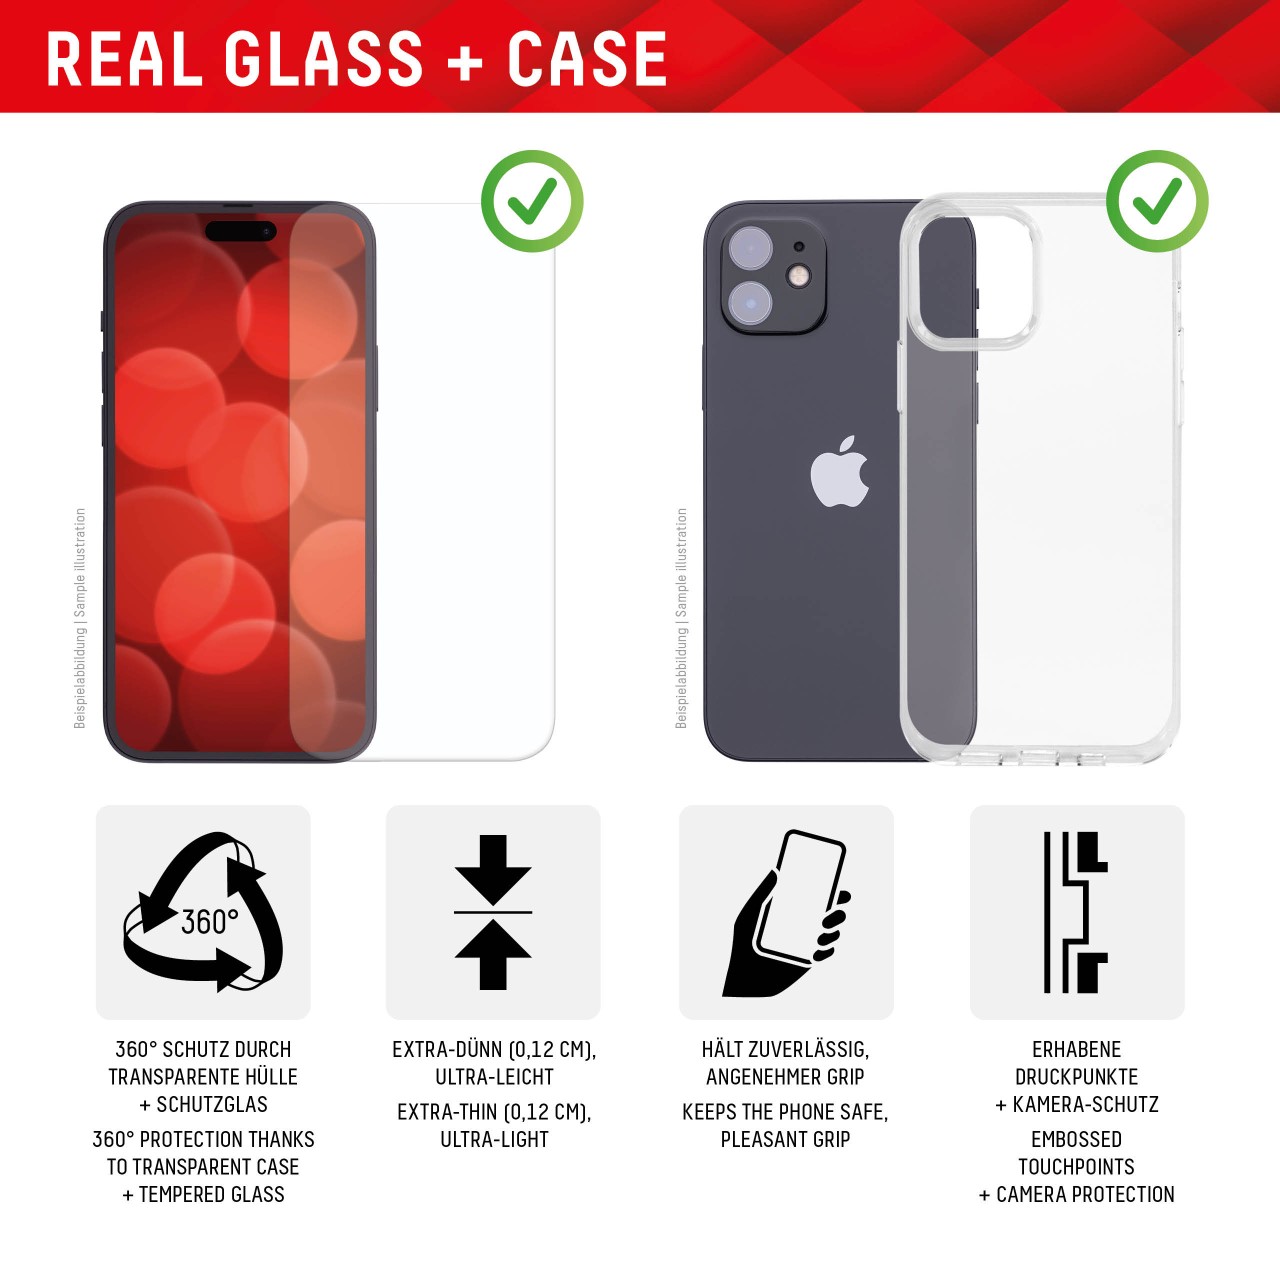 Real Glass for Apple iPhone X/XS/11 Pro (5,8"), Full Cover